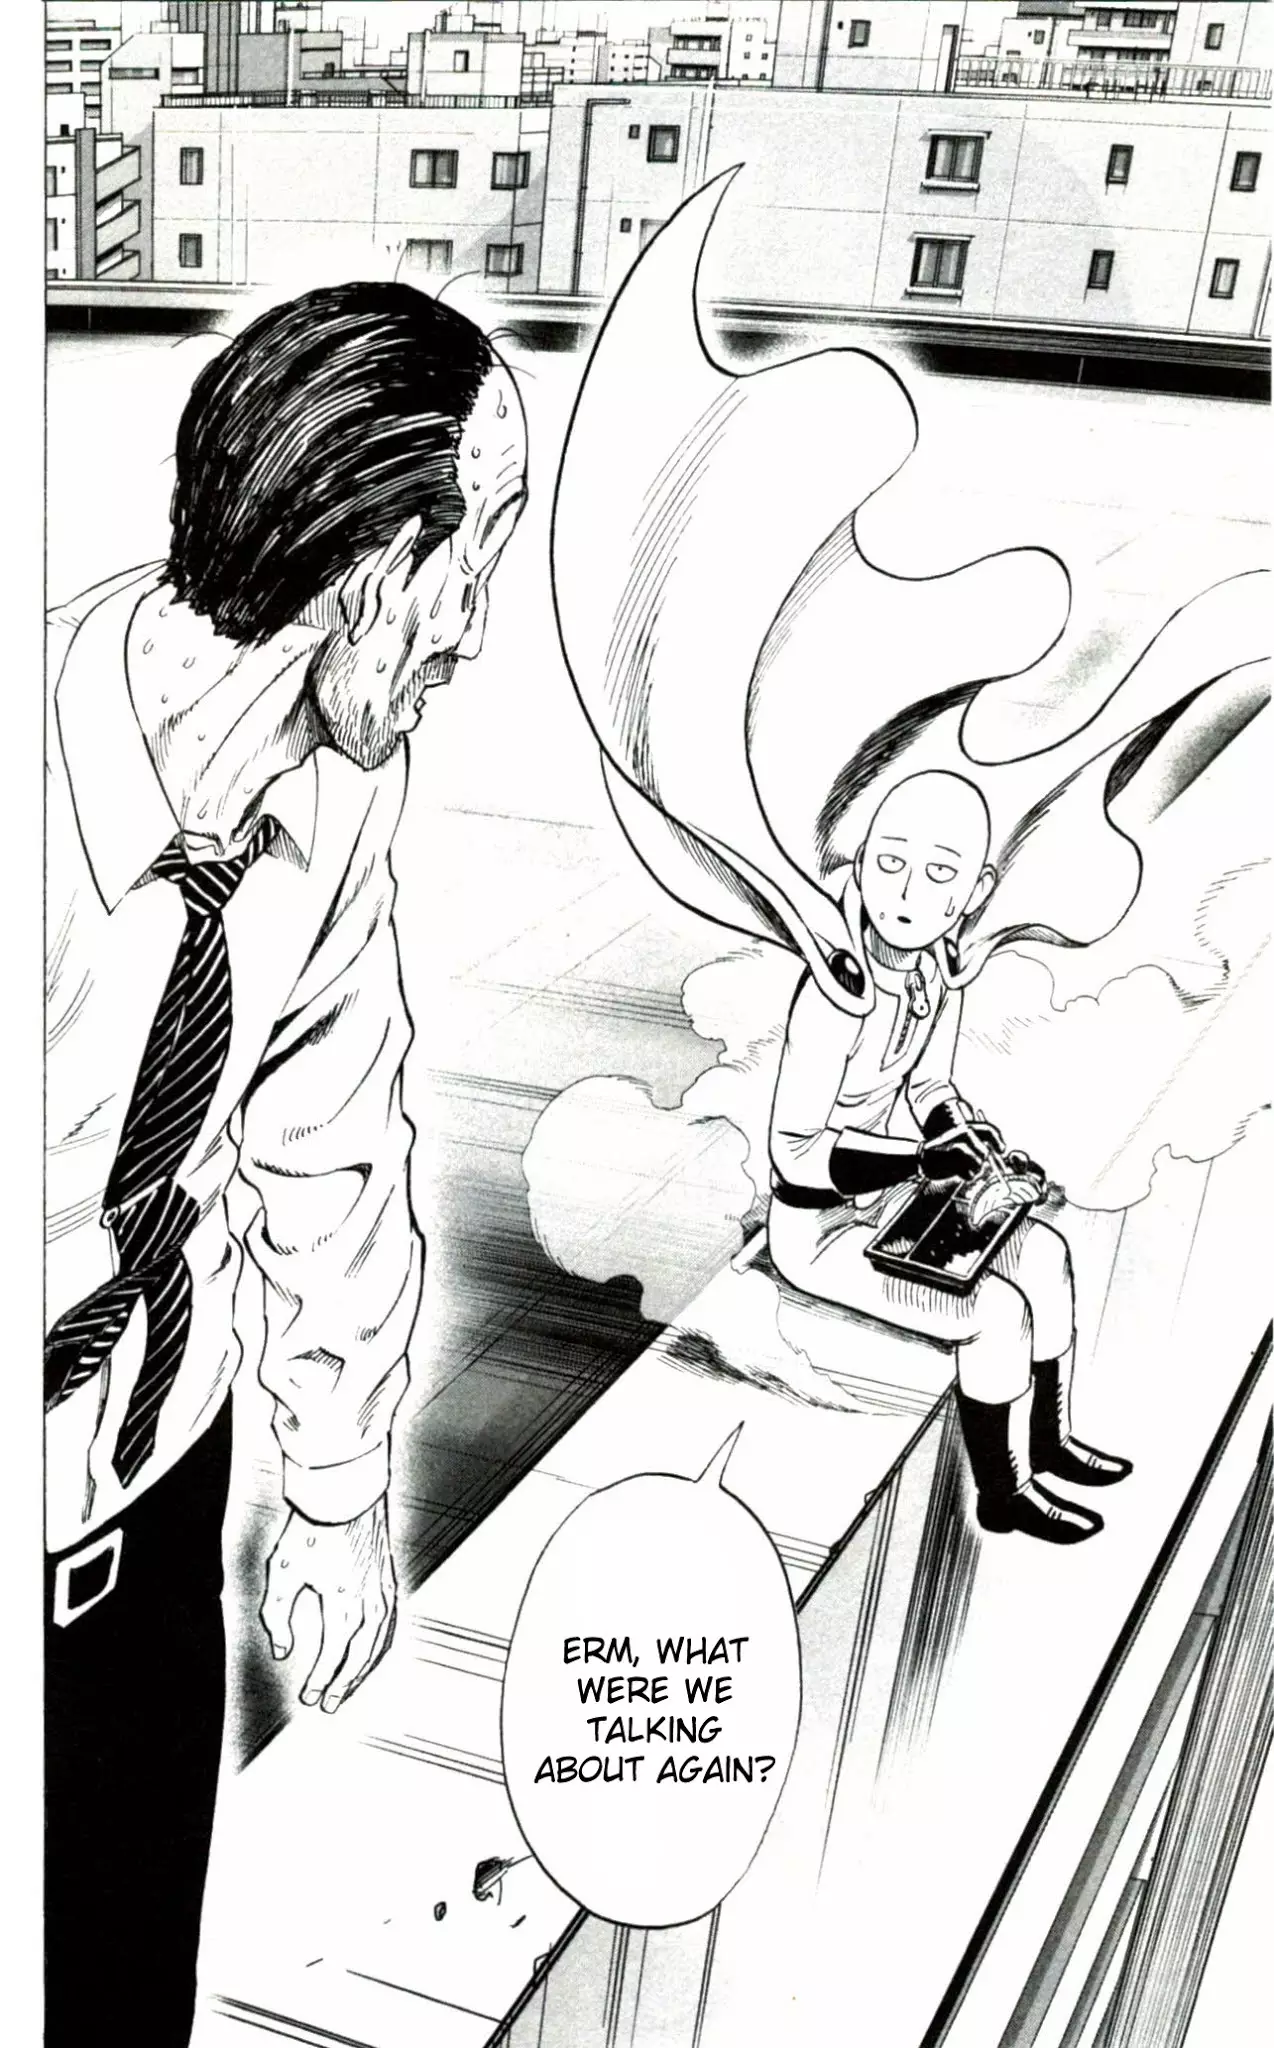 One Punch Man Chapter 34.1, READ One Punch Man Chapter 34.1 ONLINE, lost in the cloud genre,lost in the cloud gif,lost in the cloud girl,lost in the cloud goods,lost in the cloud goodreads,lost in the cloud,lost ark cloud gaming,lost odyssey cloud gaming,lost in the cloud fanart,lost in the cloud fanfic,lost in the cloud fandom,lost in the cloud first kiss,lost in the cloud font,lost in the cloud ending,lost in the cloud episode 97,lost in the cloud edit,lost in the cloud explained,lost in the cloud dog,lost in the cloud discord server,lost in the cloud desktop wallpaper,lost in the cloud drawing,can't find my cloud on network,lost in the cloud characters,lost in the cloud chapter 93 release date,lost in the cloud birthday,lost in the cloud birthday art,lost in the cloud background,lost in the cloud banner,lost in the clouds meaning,what is the black cloud in lost,lost in the cloud ao3,lost in the cloud anime,lost in the cloud art,lost in the cloud author twitter,lost in the cloud author instagram,lost in the cloud artist,lost in the cloud acrylic stand,lost in the cloud artist twitter,lost in the cloud art style,lost in the cloud analysis